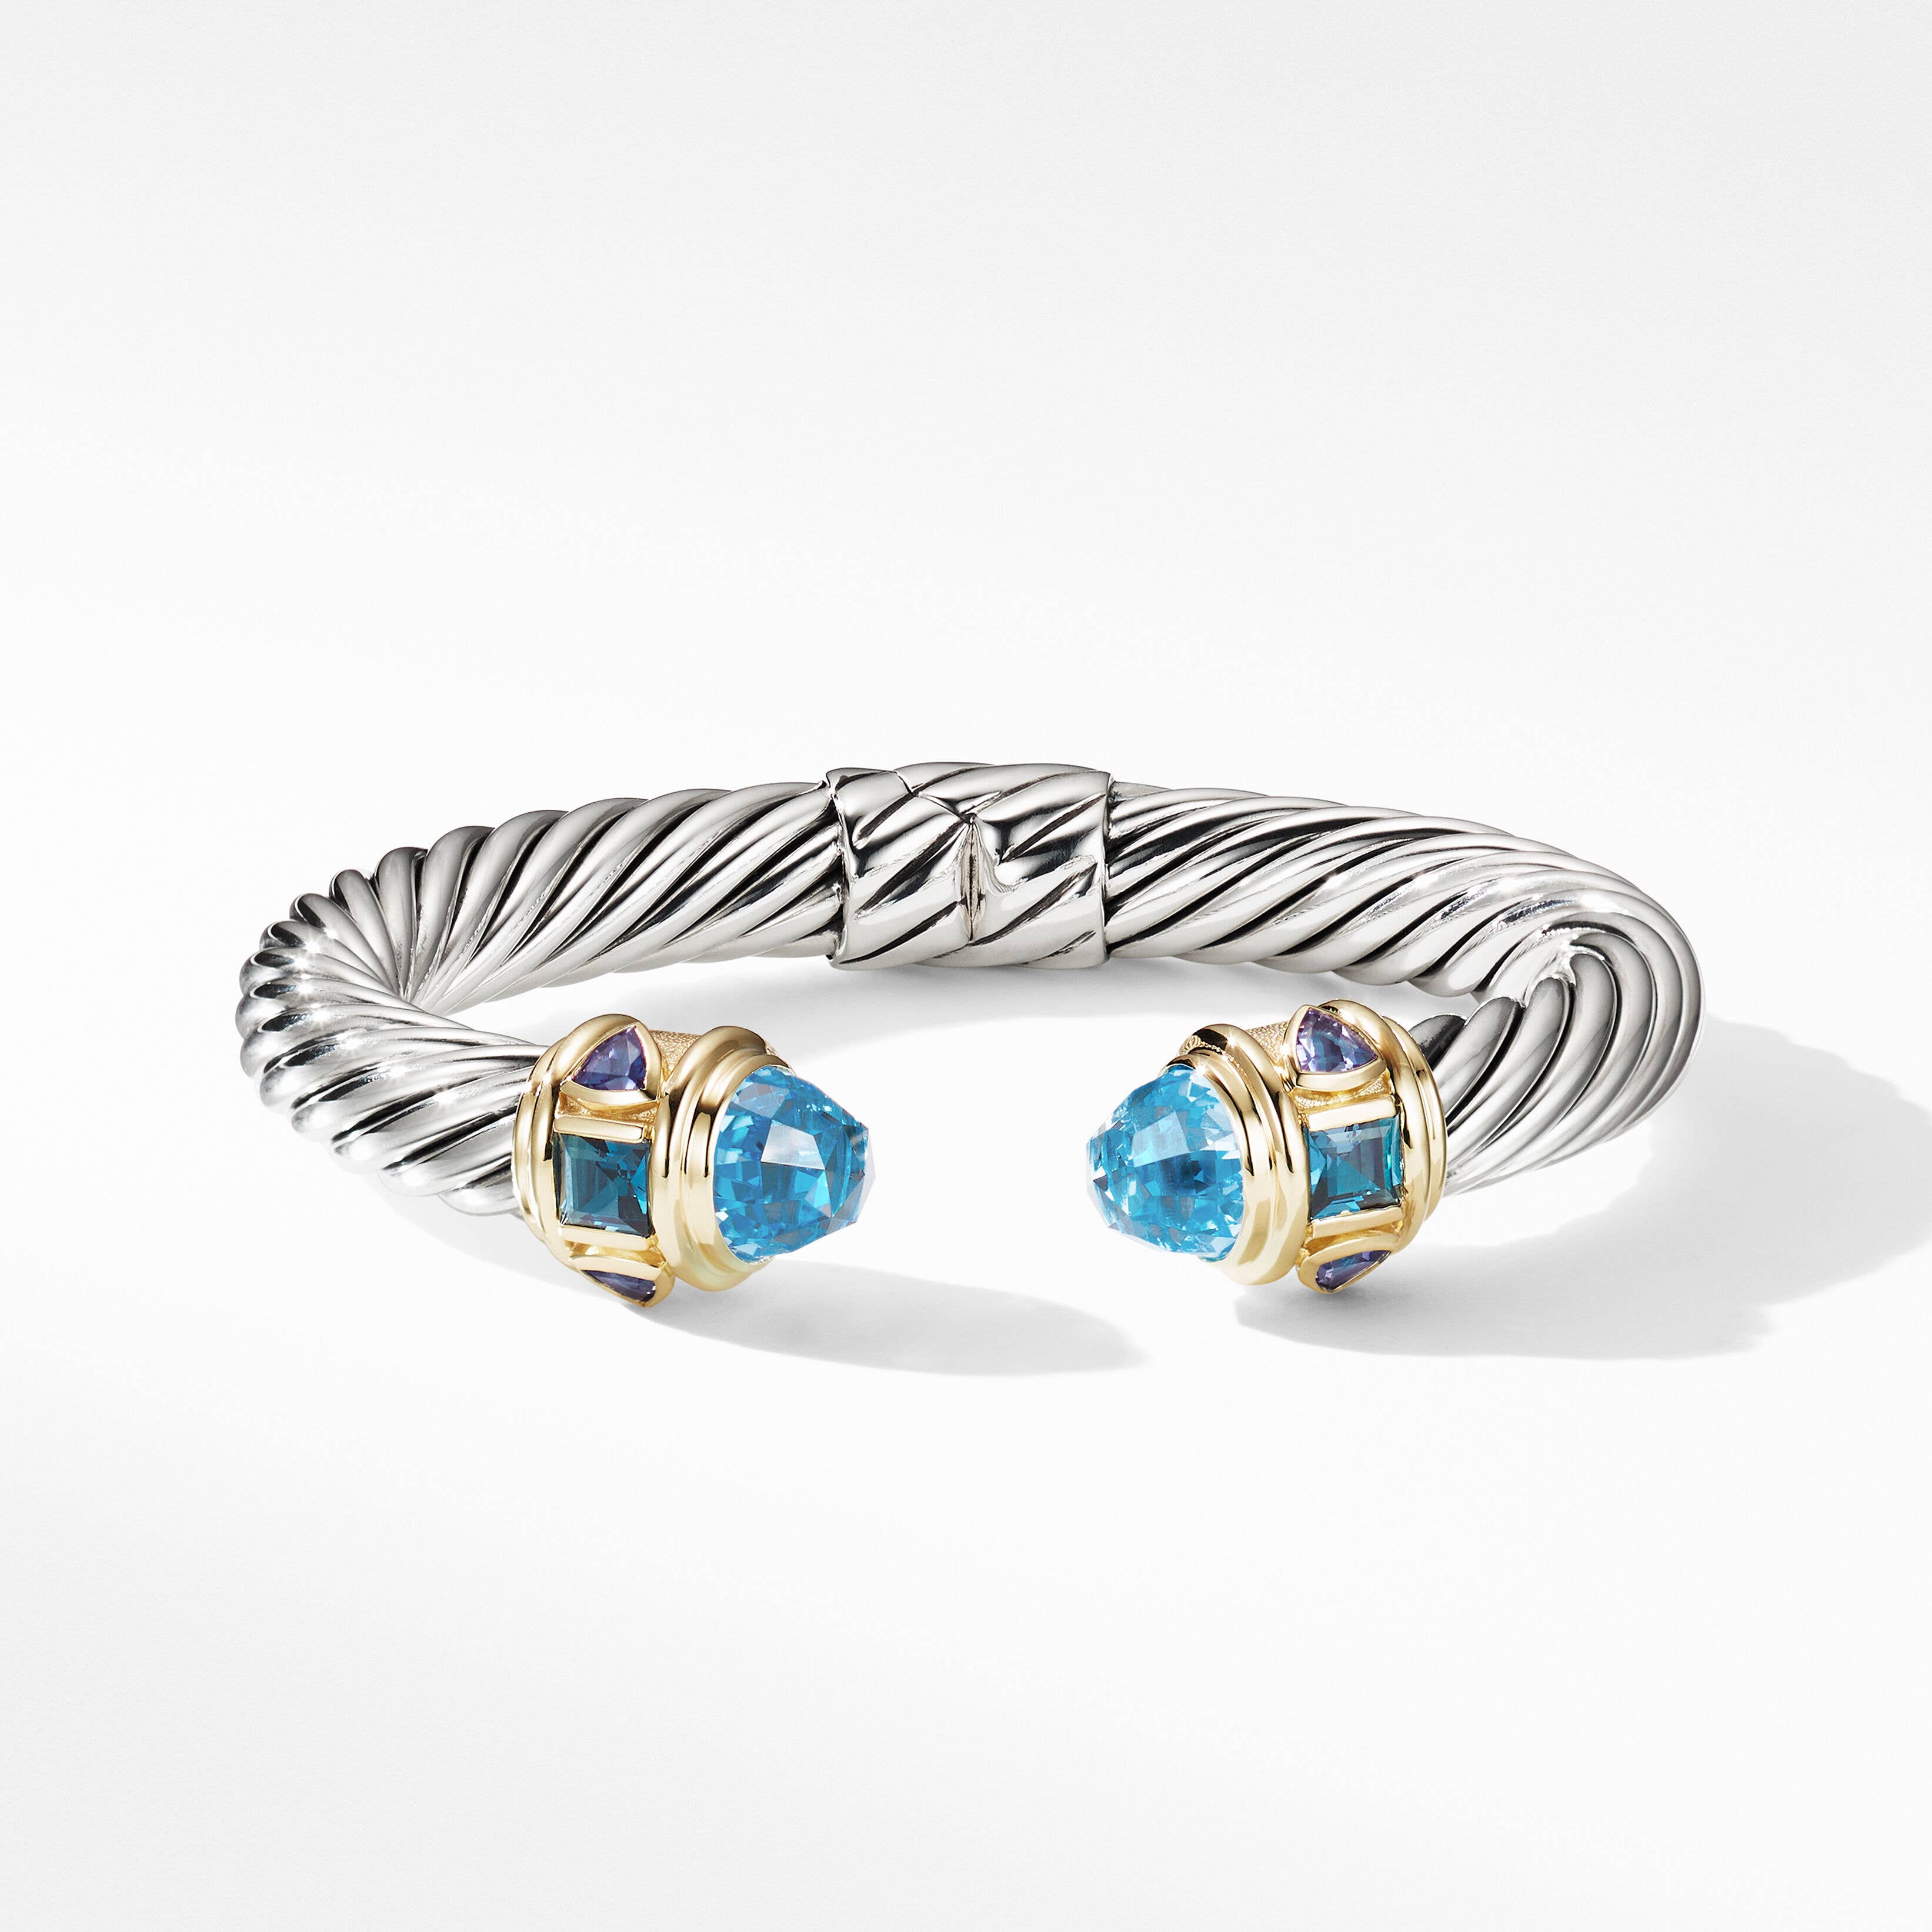 Renaissance Colour Bracelet in Sterling Silver with Blue Topaz, Hampton Blue Topaz, Iolite and 14K Yellow Gold